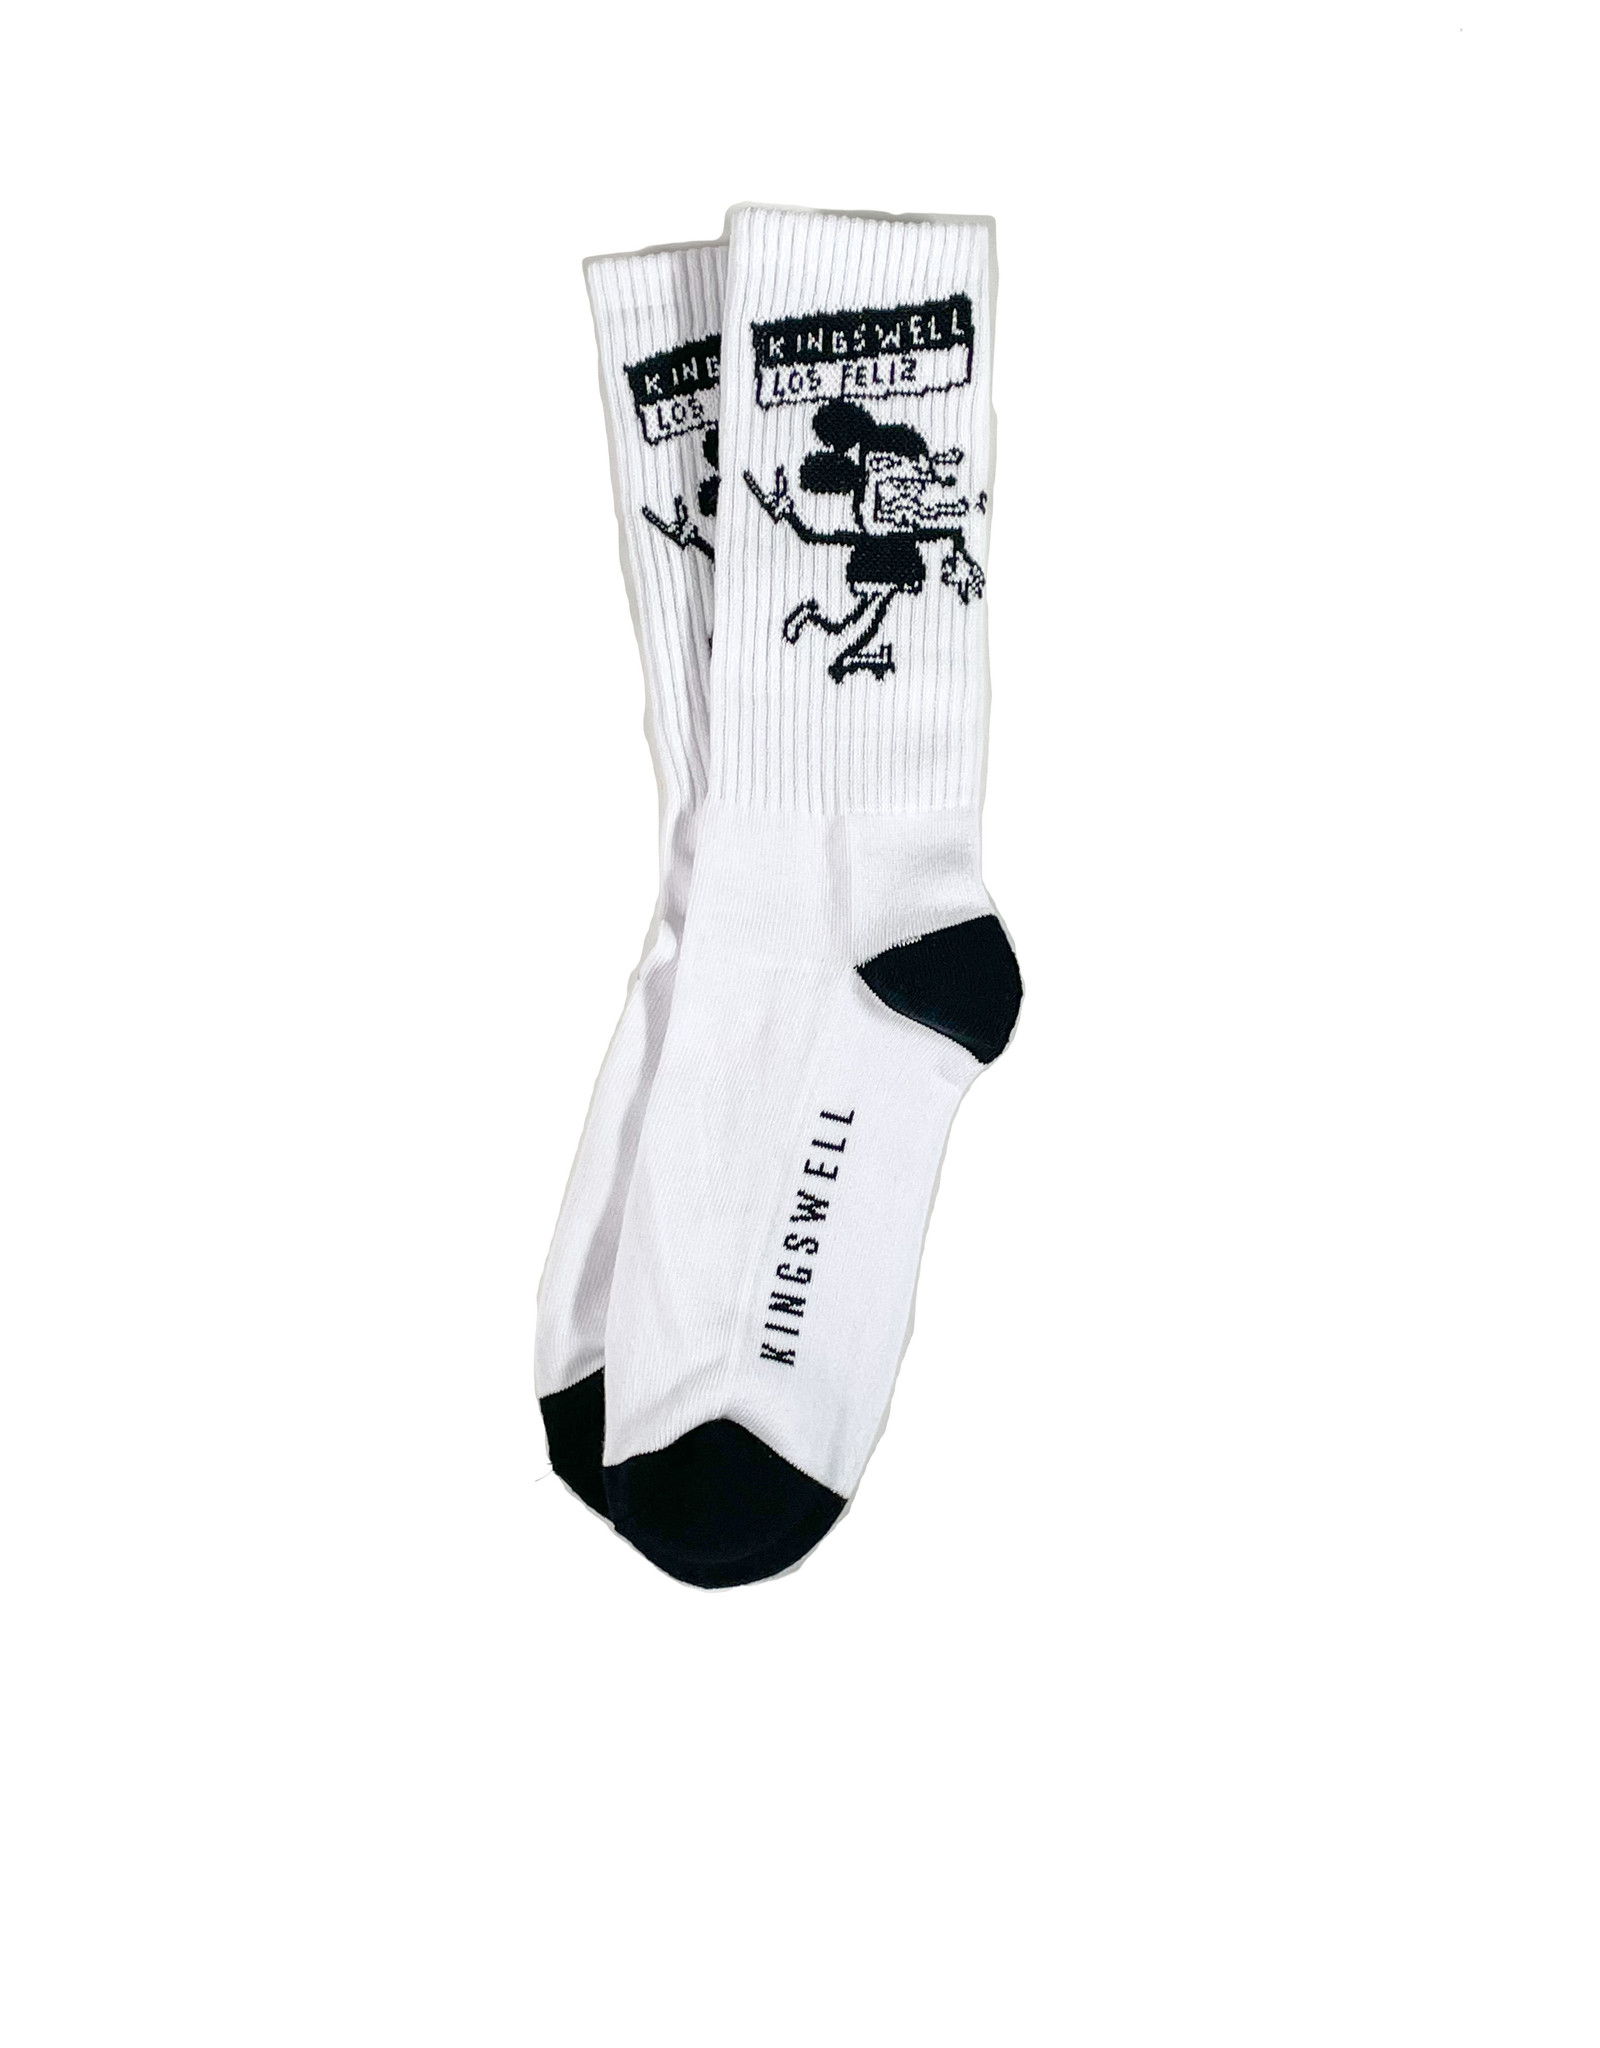 KINGSWELL KINGSWELL SKETCHY MOUSE SOCK - WHITE